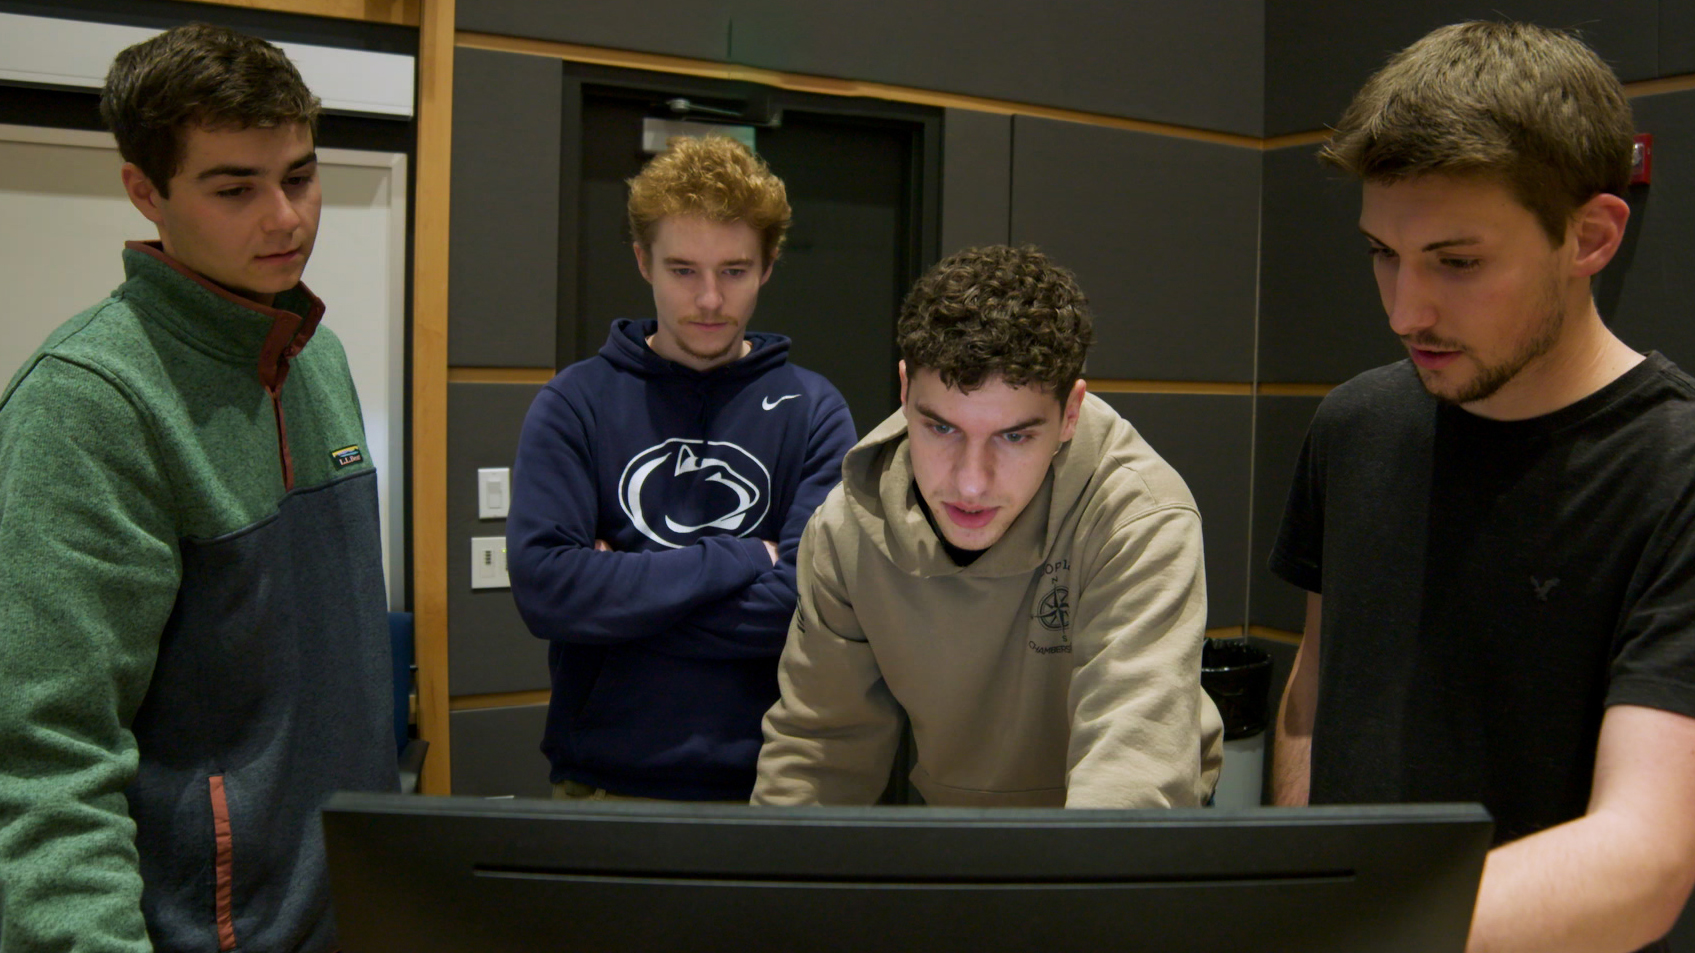 A group of four students gathered behind a computer monitor.